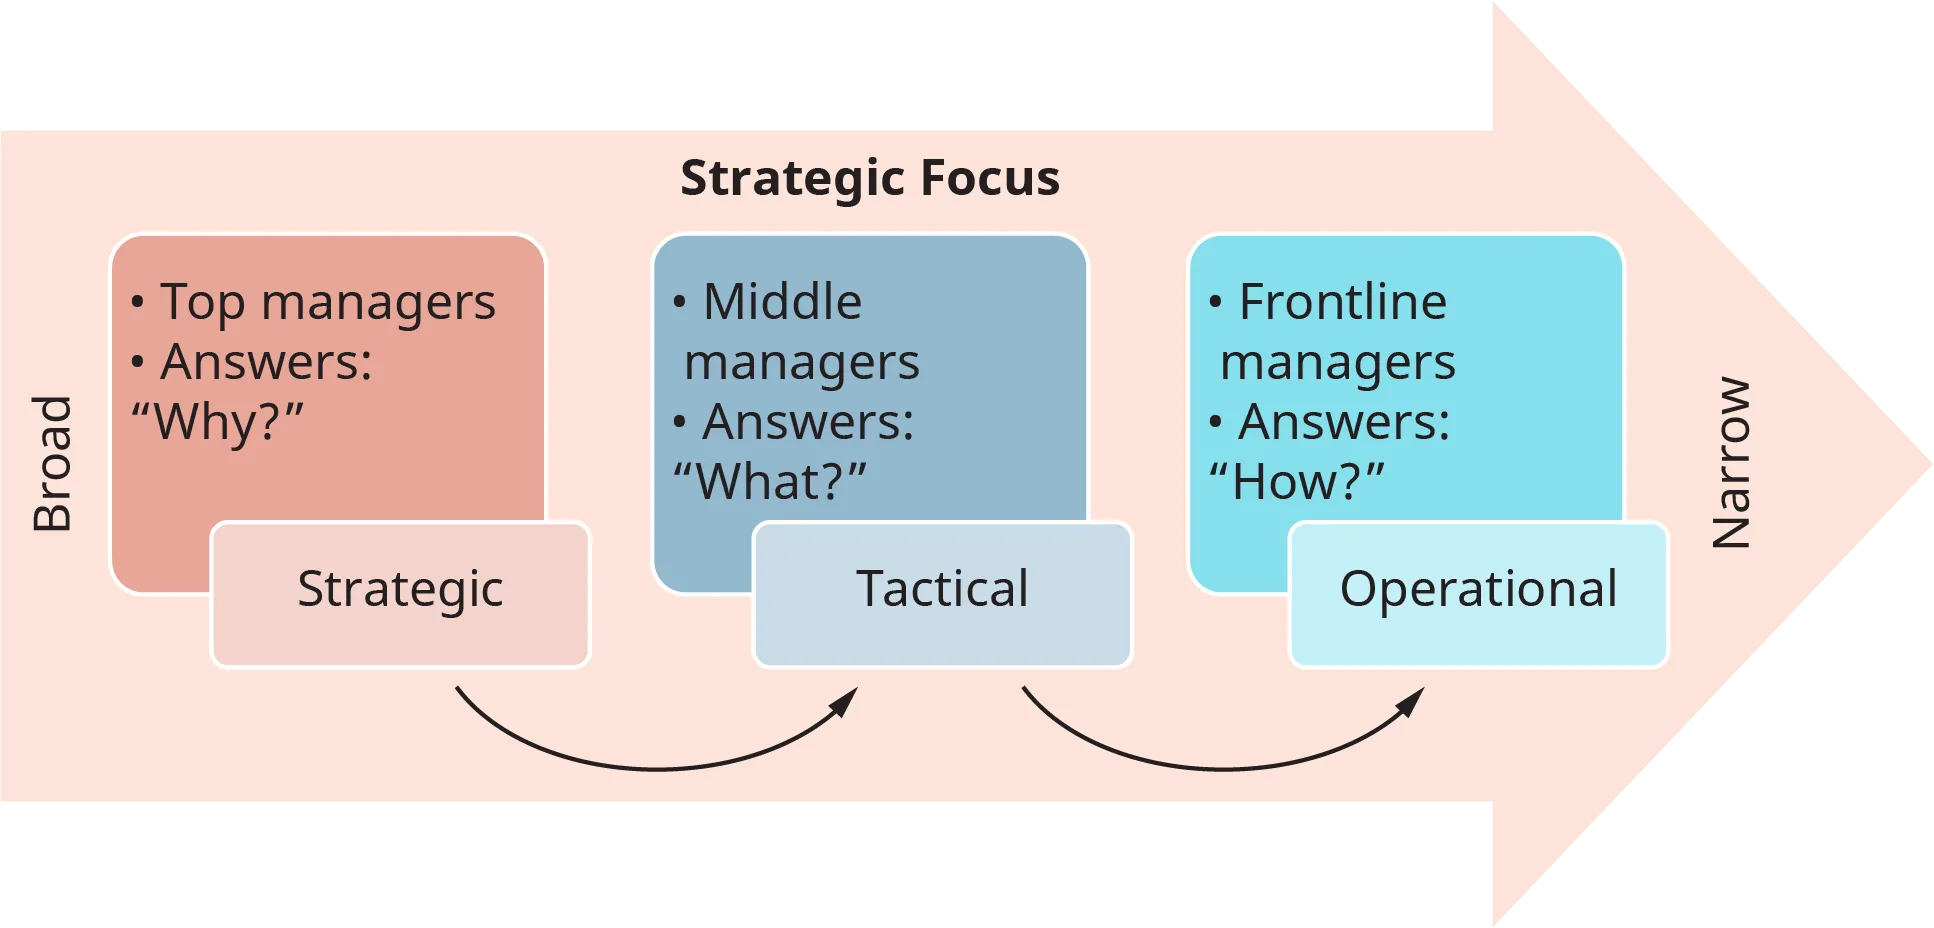 A diagram titled “Strategic Focus” shows the levels of strategic planning depicted on a rightward arrow.